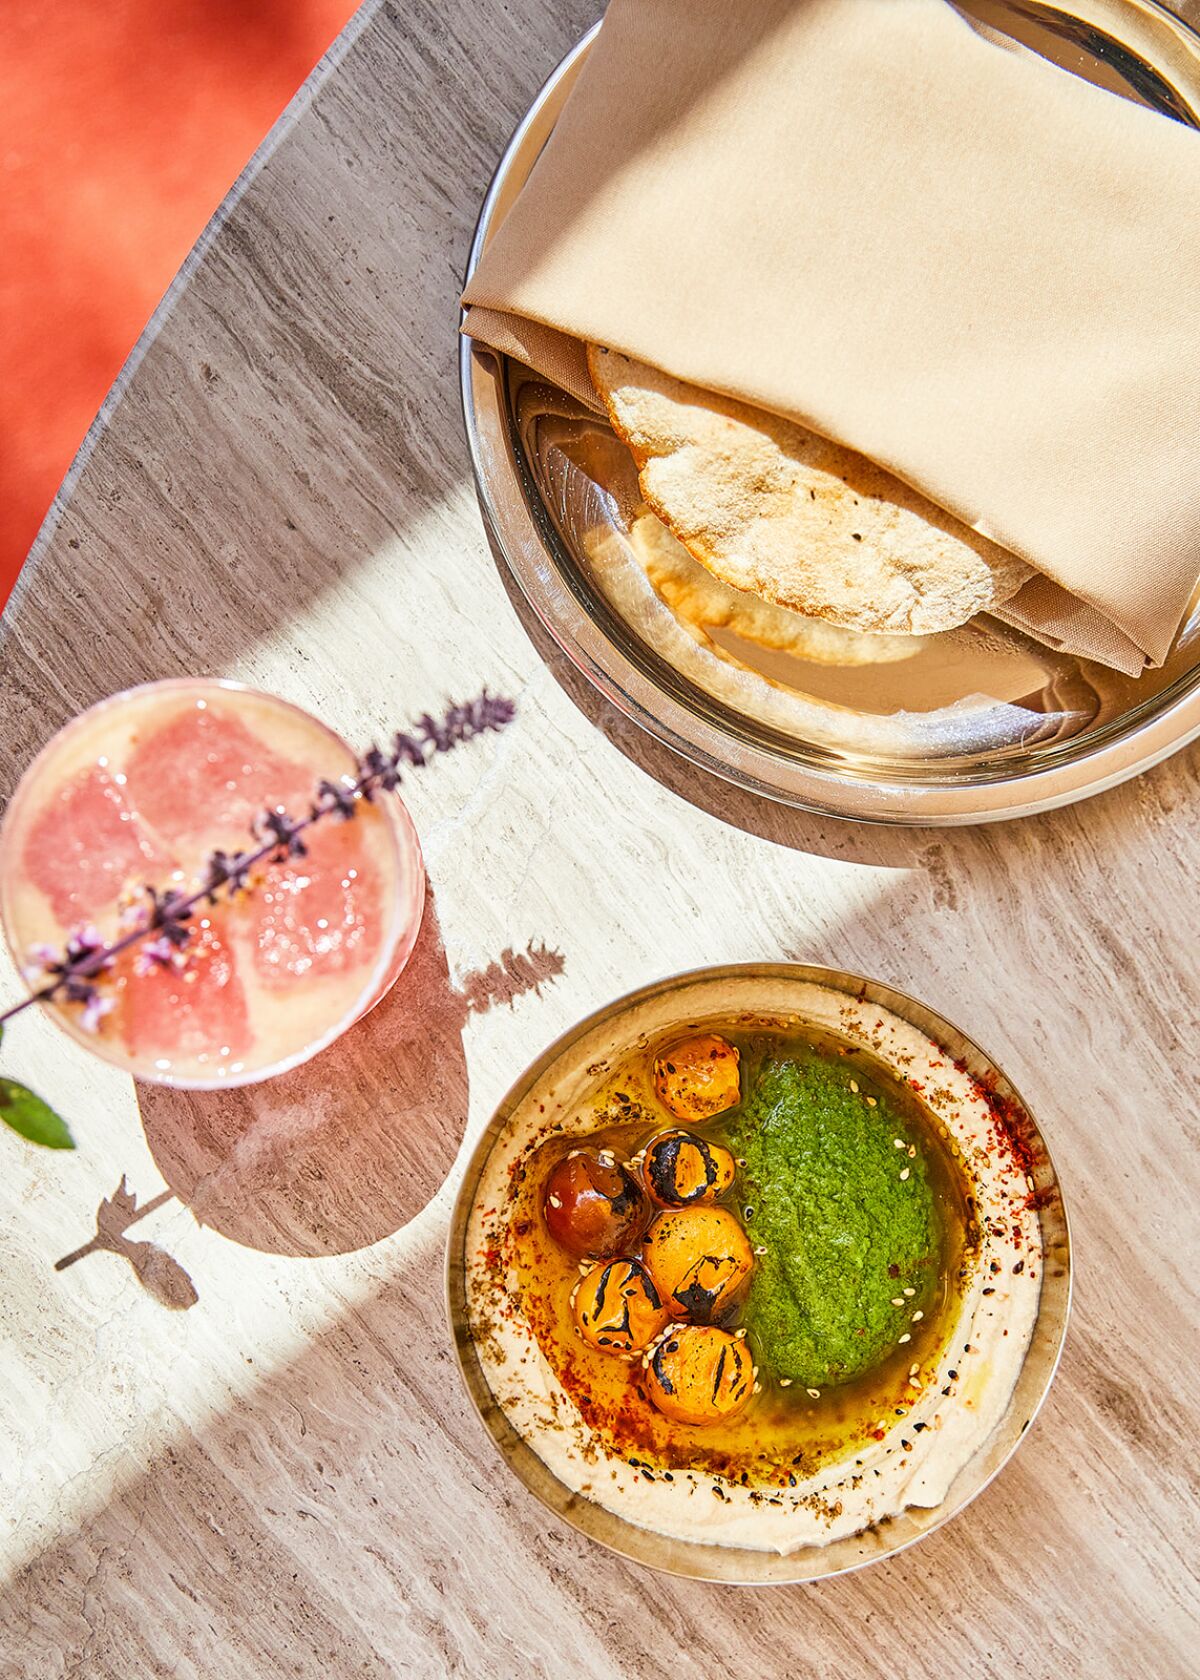 Pita bread, hummus and a cocktail are menu starters at Callie restaurant, opening June 4 in East Village.